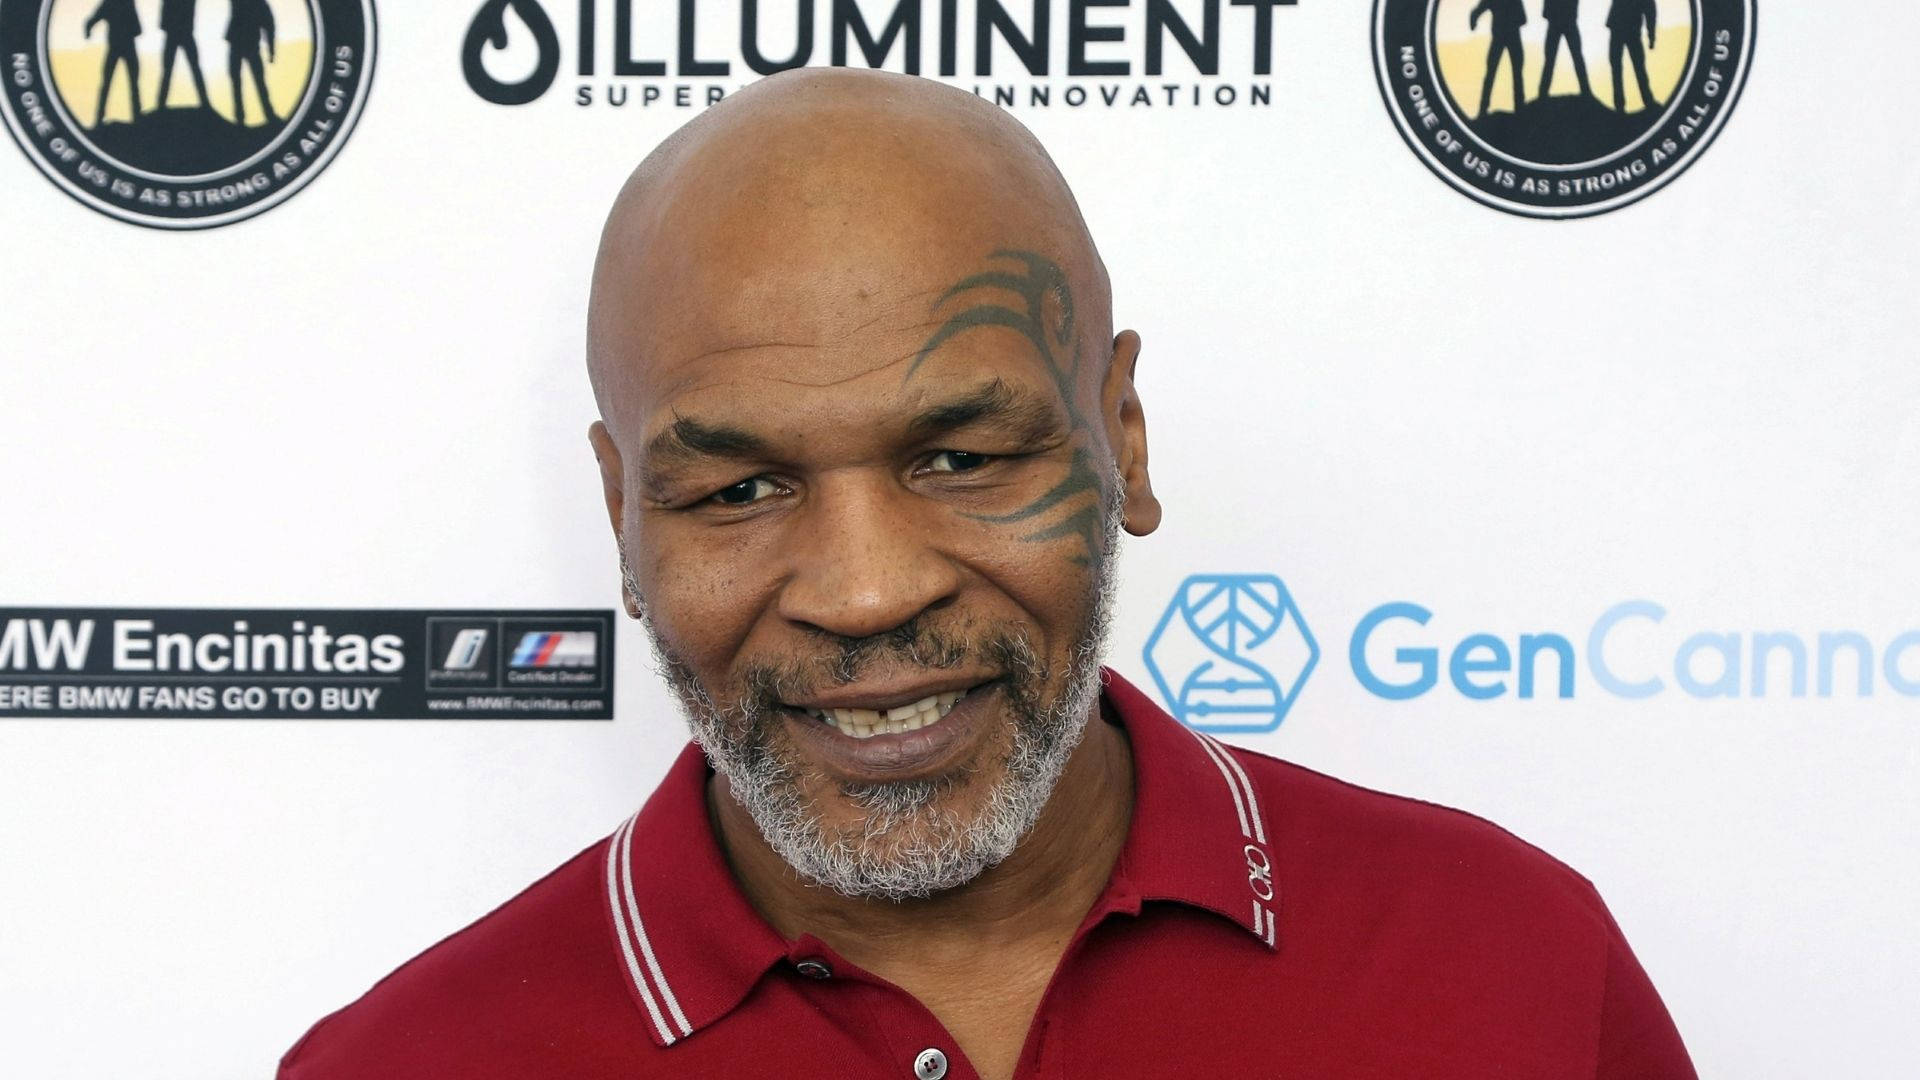 Smiling Mike Tyson